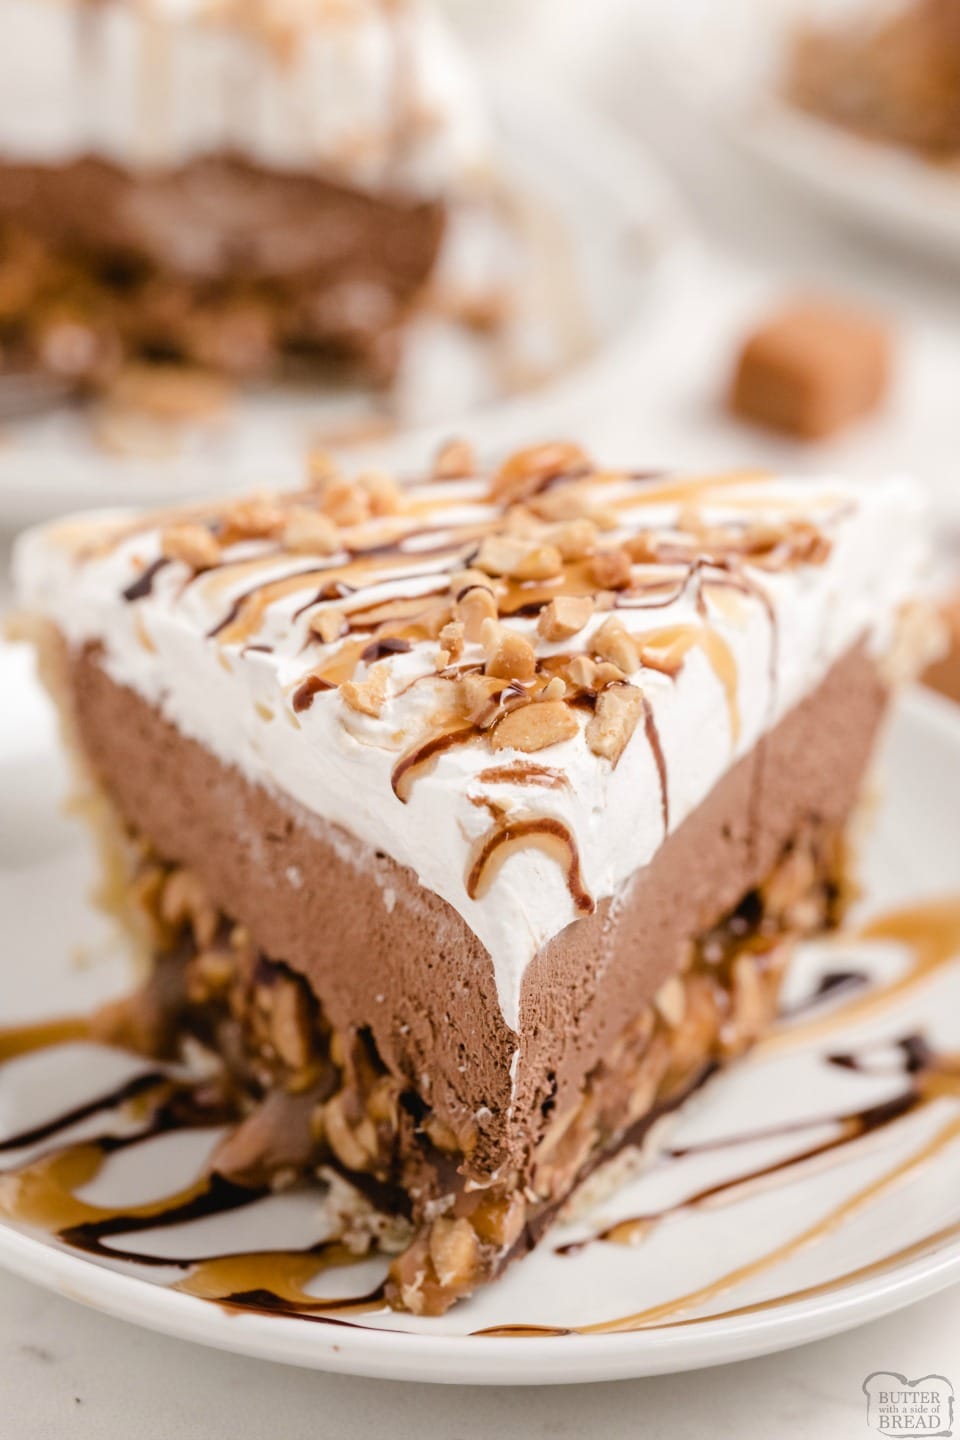 Chocolate Caramel Turtle Pie made with creamy chocolate, salted peanuts and smooth caramel for a delicious 3 layered pie that everyone raves about!